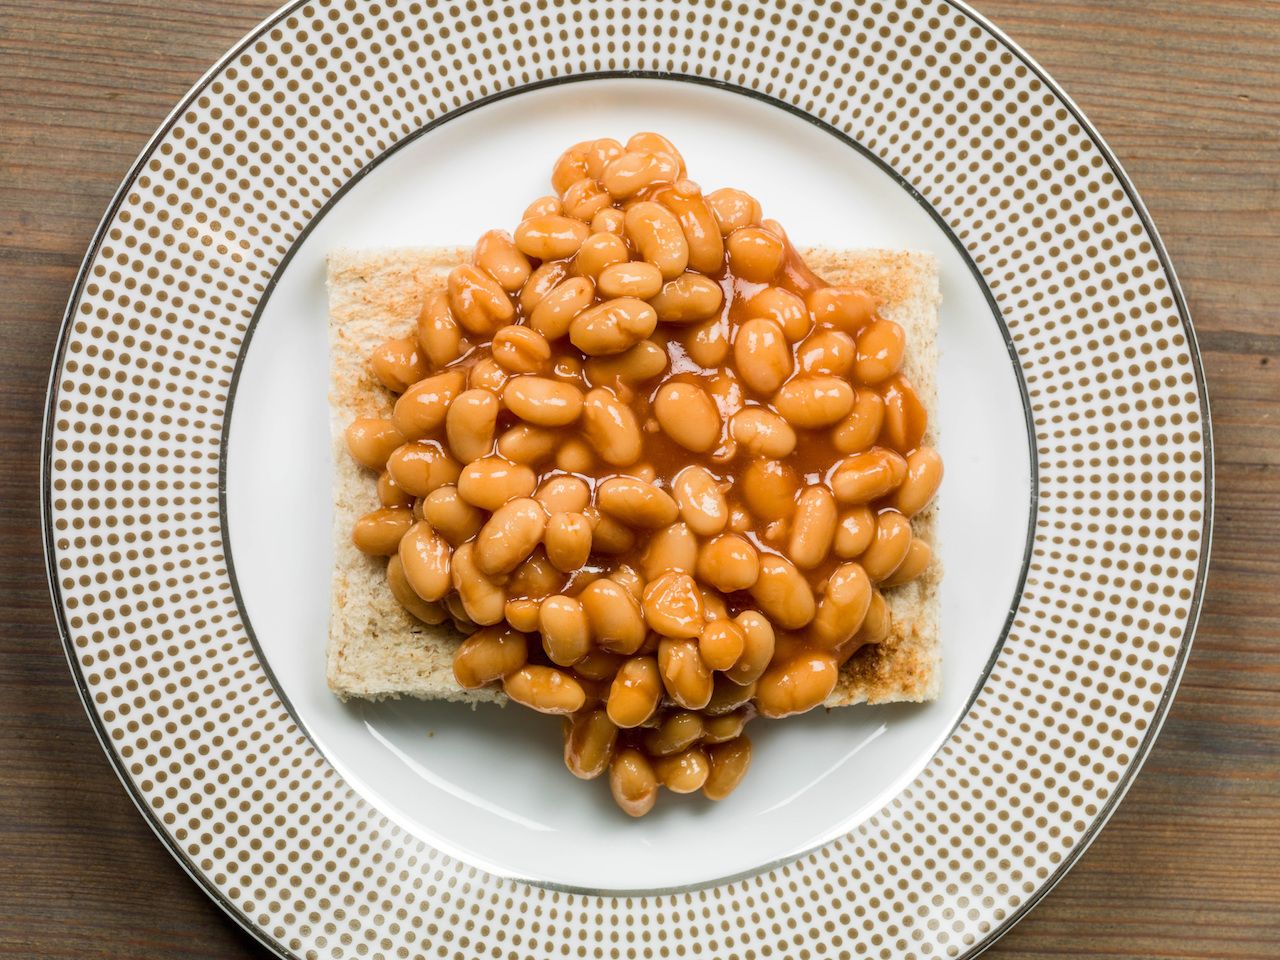 Cooked Breakfast or Snack of Baked Beans on Toast